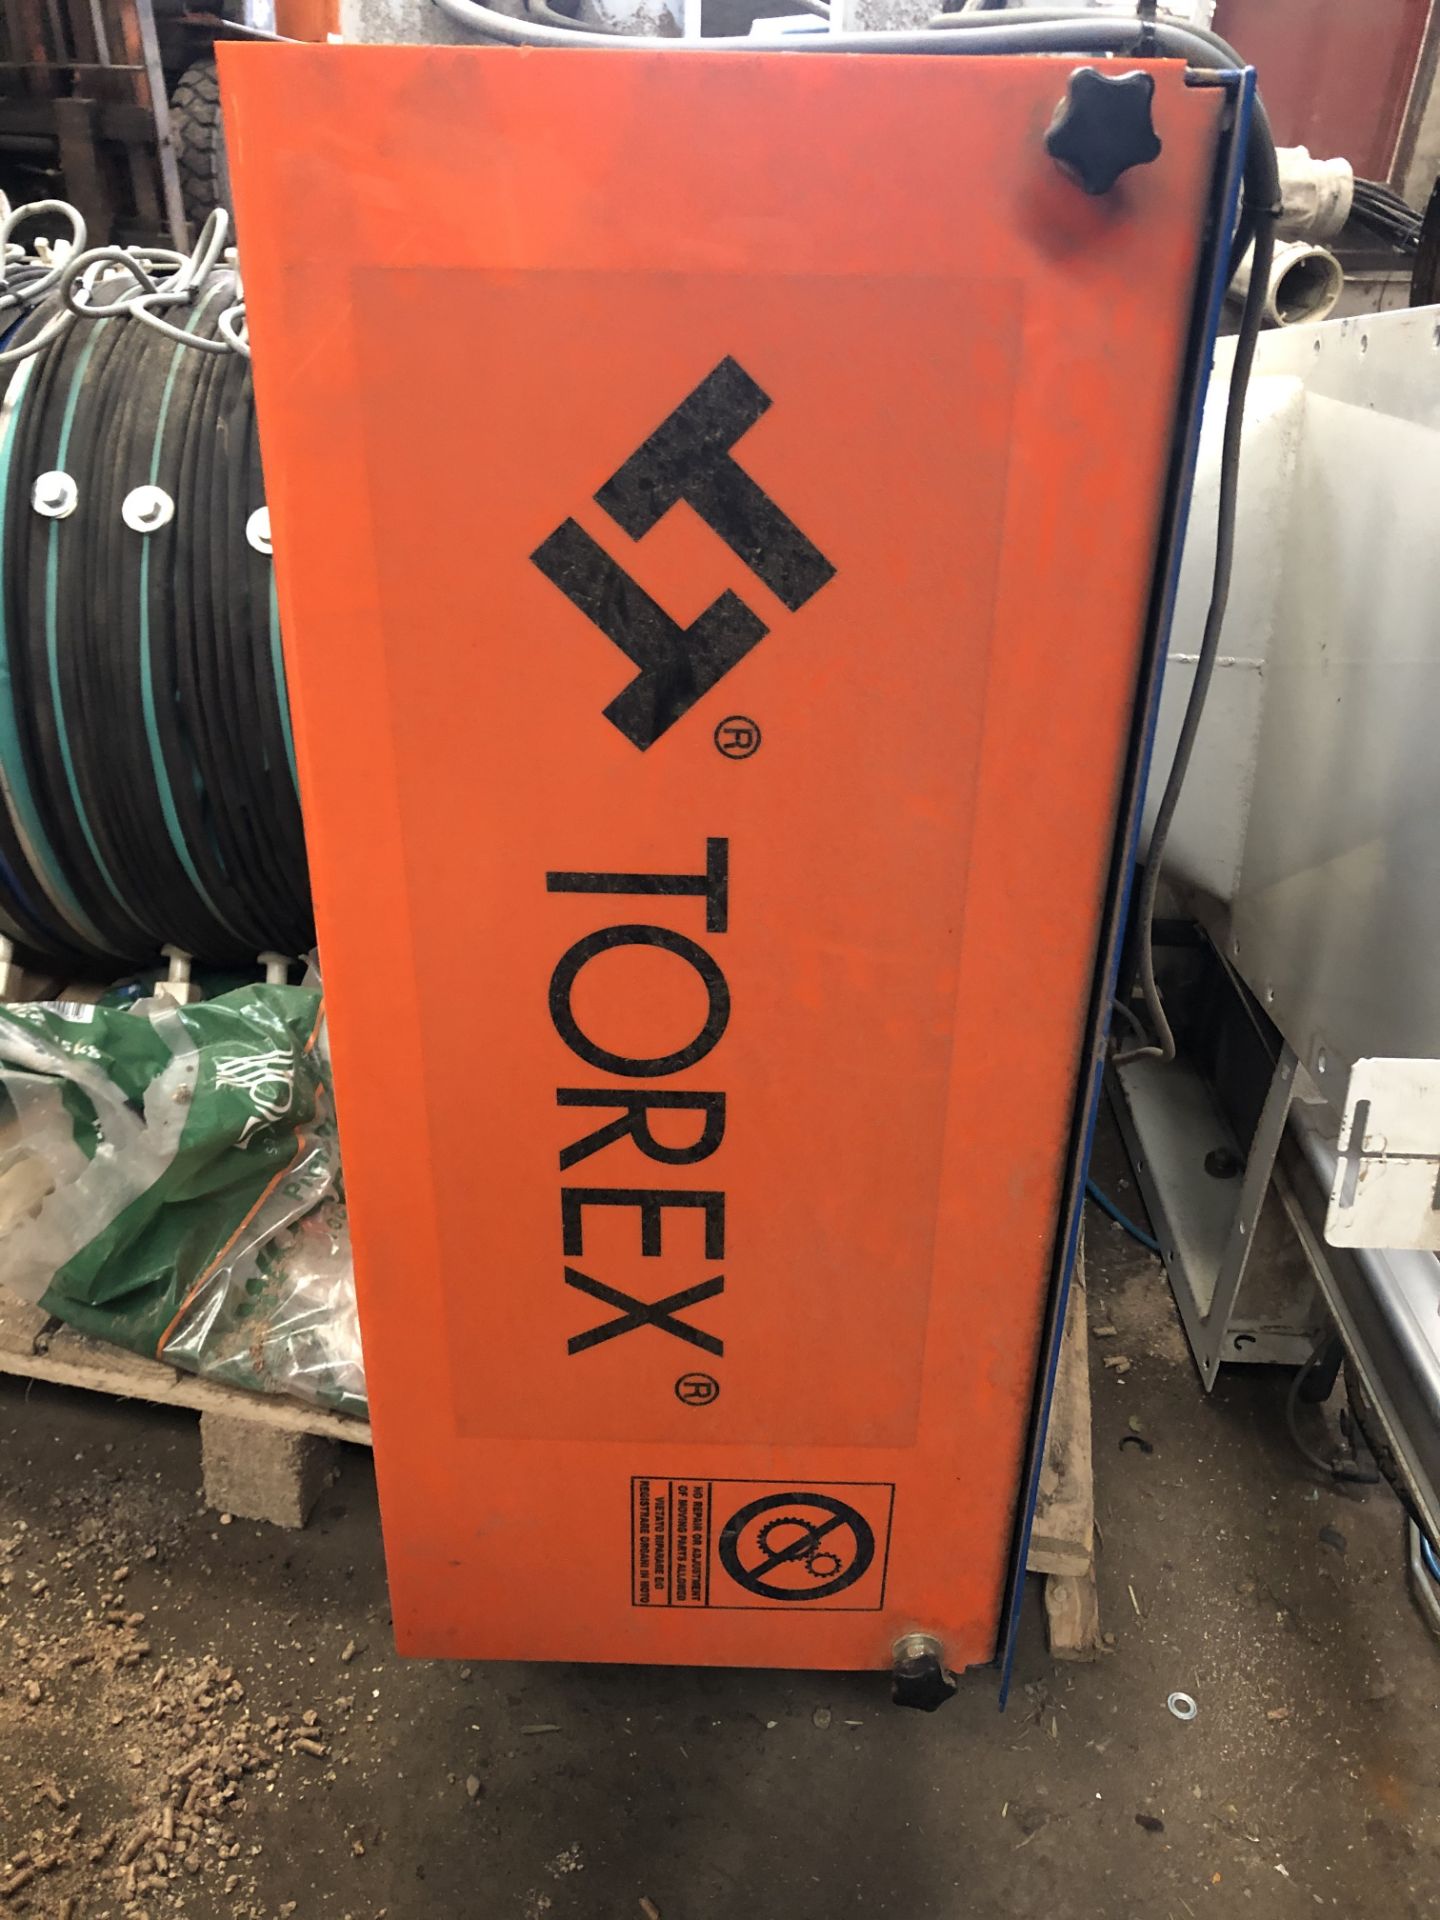 Torex Loading Bellow (as new condition - seen very little if any use), year of manufacture 2017, - Image 4 of 5